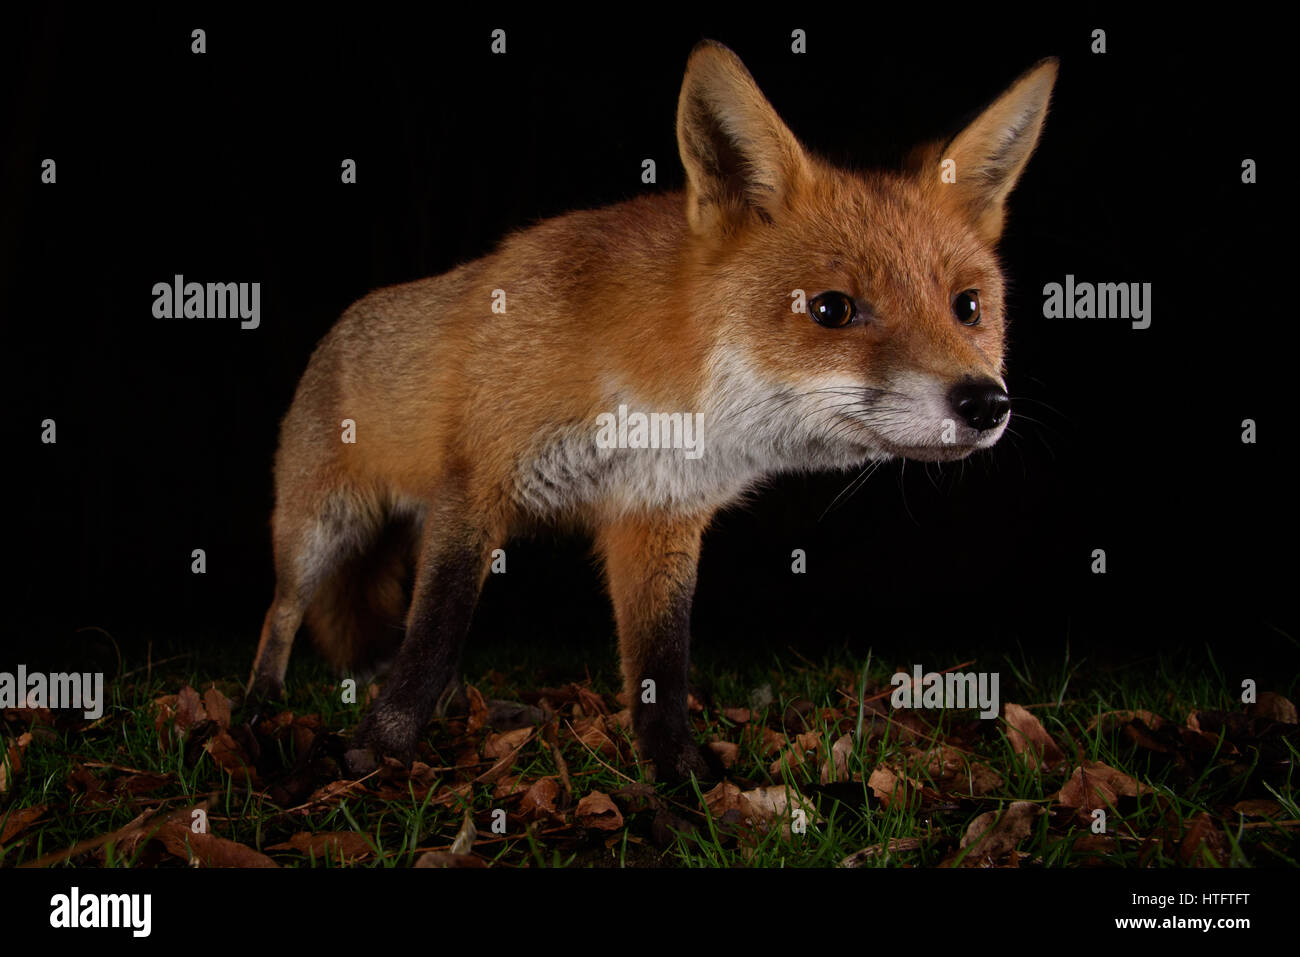 Urban fox on the prowl in a London garden at night Stock Photo